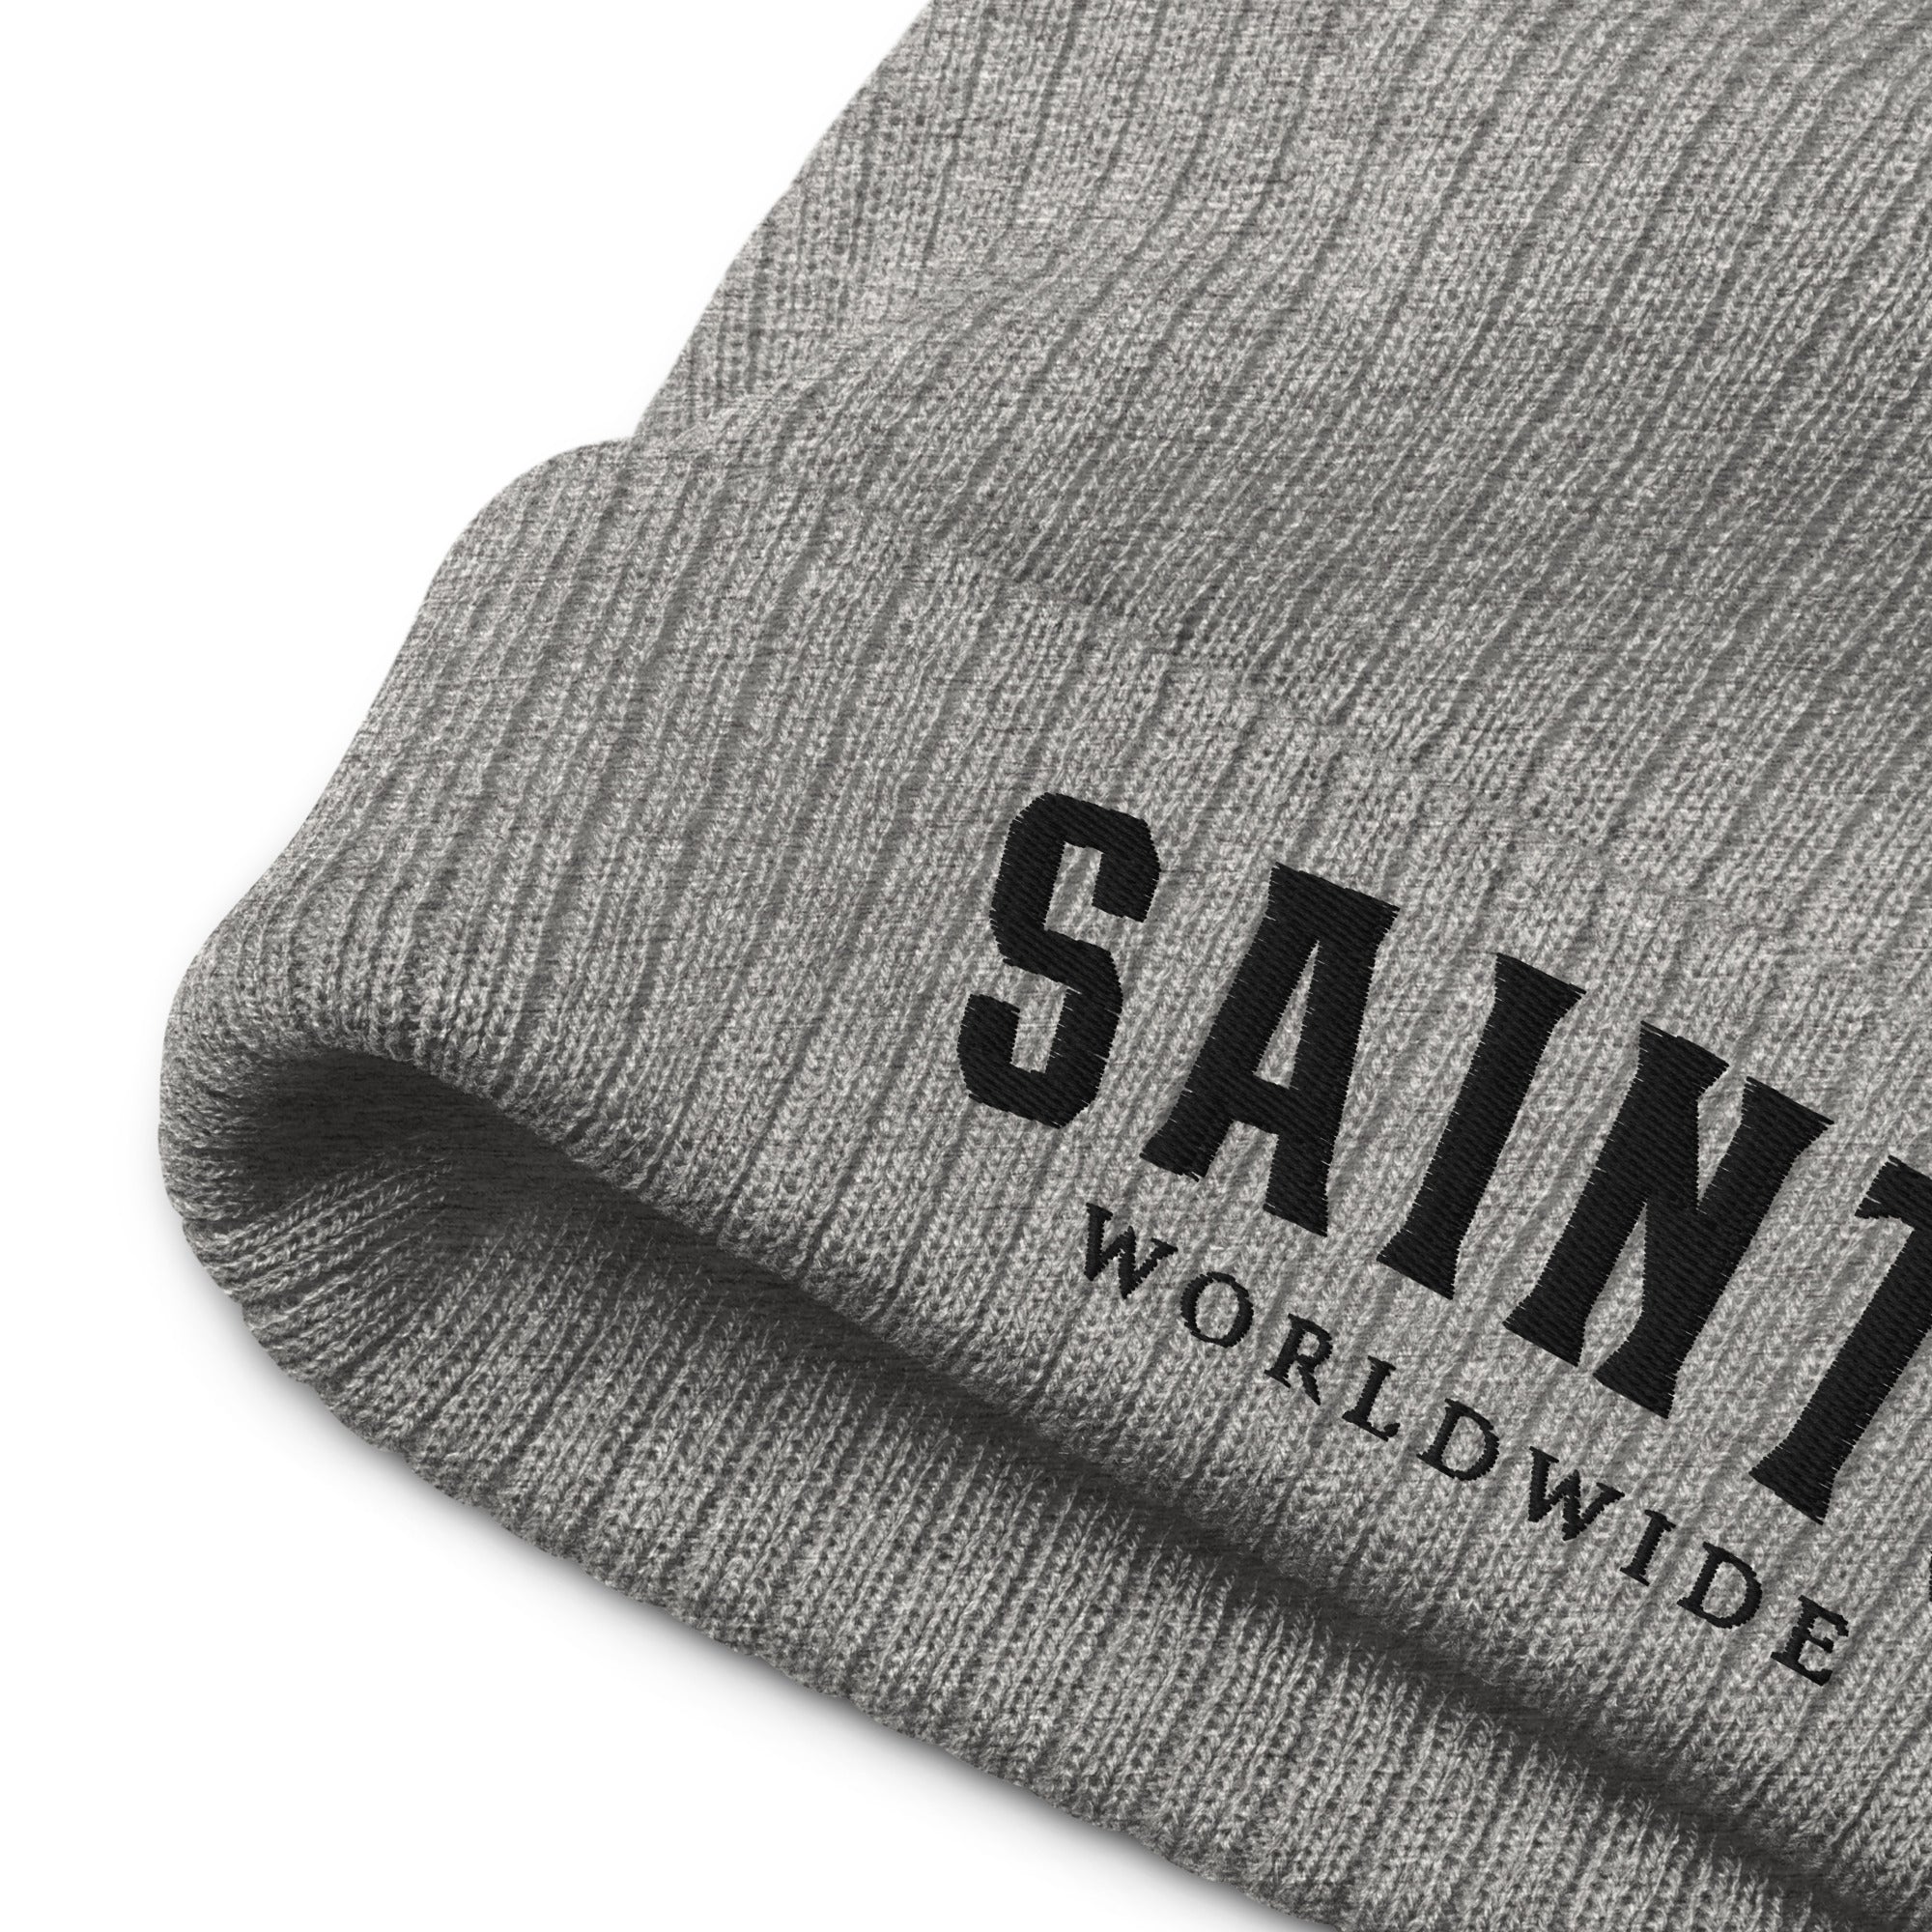 SW SANCTIFIED Ribbed knit Beanie - Grey - Great Commission Company